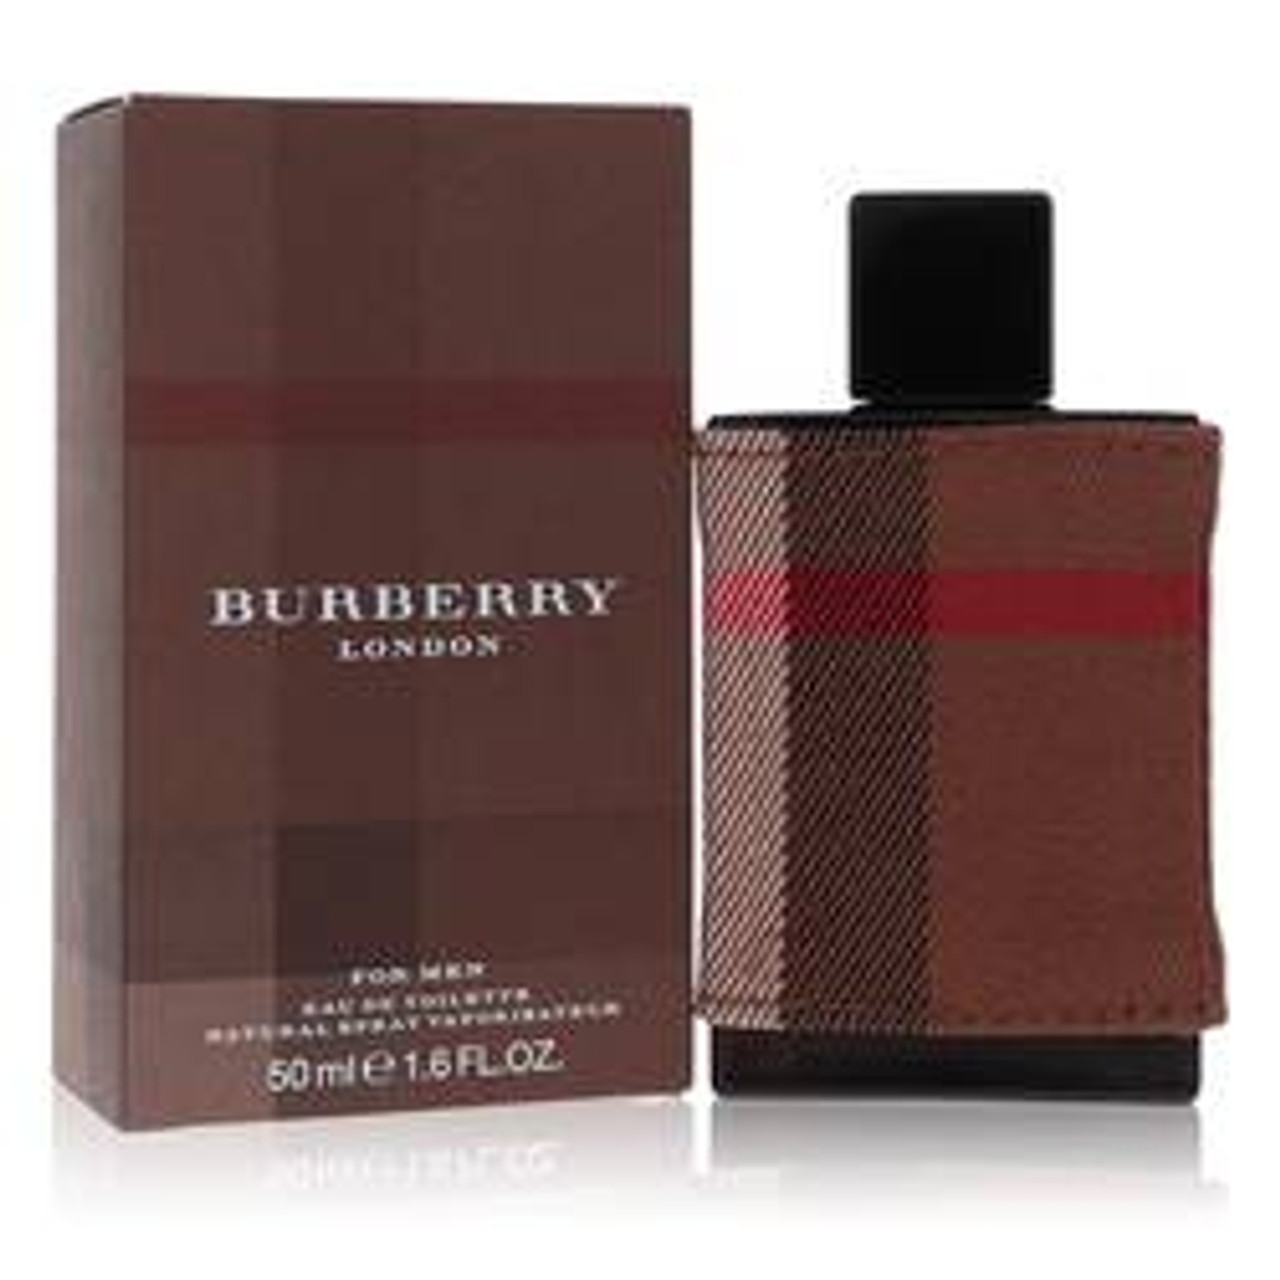 Burberry London (new) Cologne By Burberry Eau De Toilette Spray 1.7 oz for Men - [From 100.00 - Choose pk Qty ] - *Ships from Miami